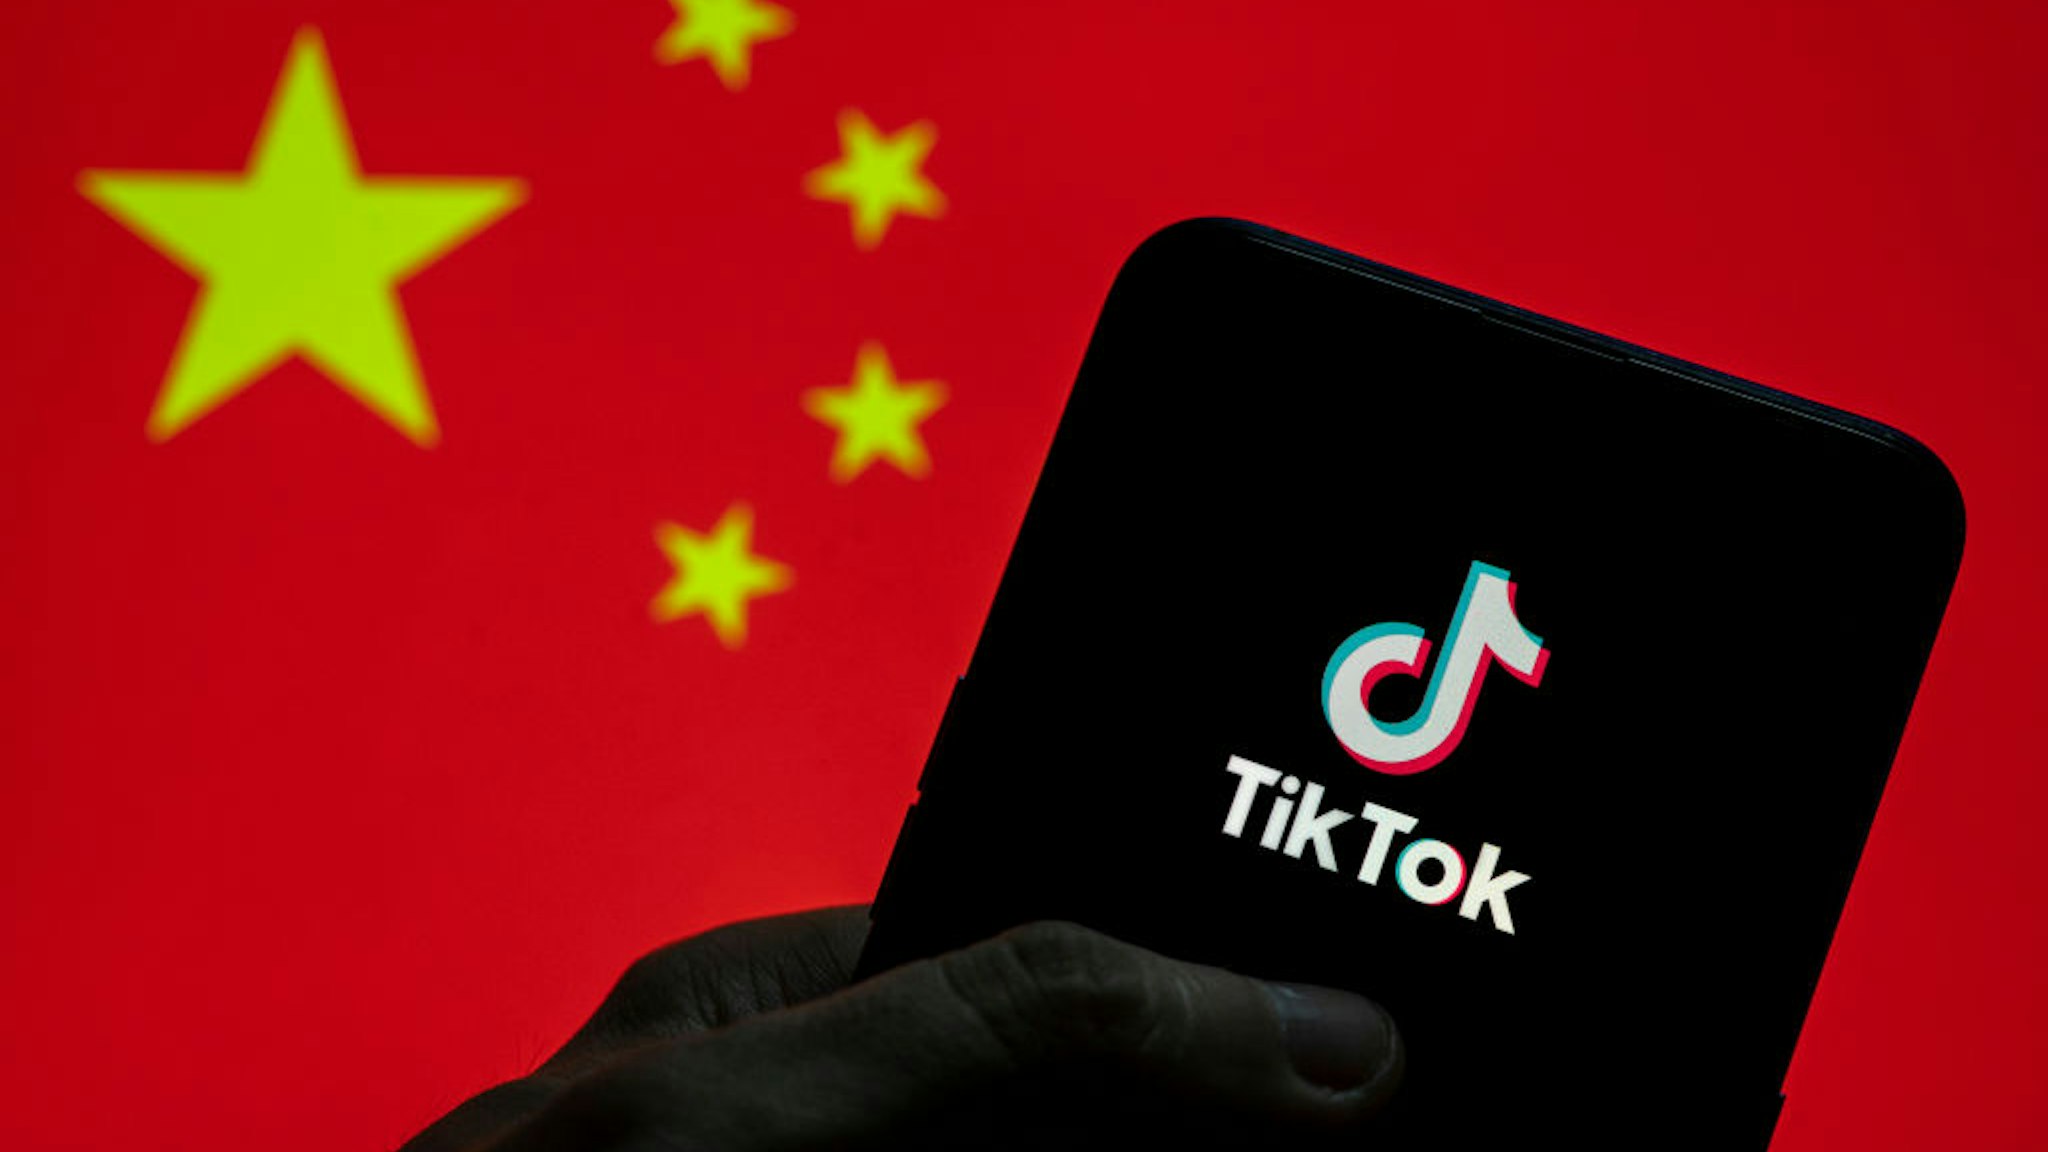 CHINA - 2021/03/28: In this photo illustration the Chinese video-sharing social networking service company TikTok logo seen on an Android mobile device with People's Republic of China flag in the background. (Photo Illustration by